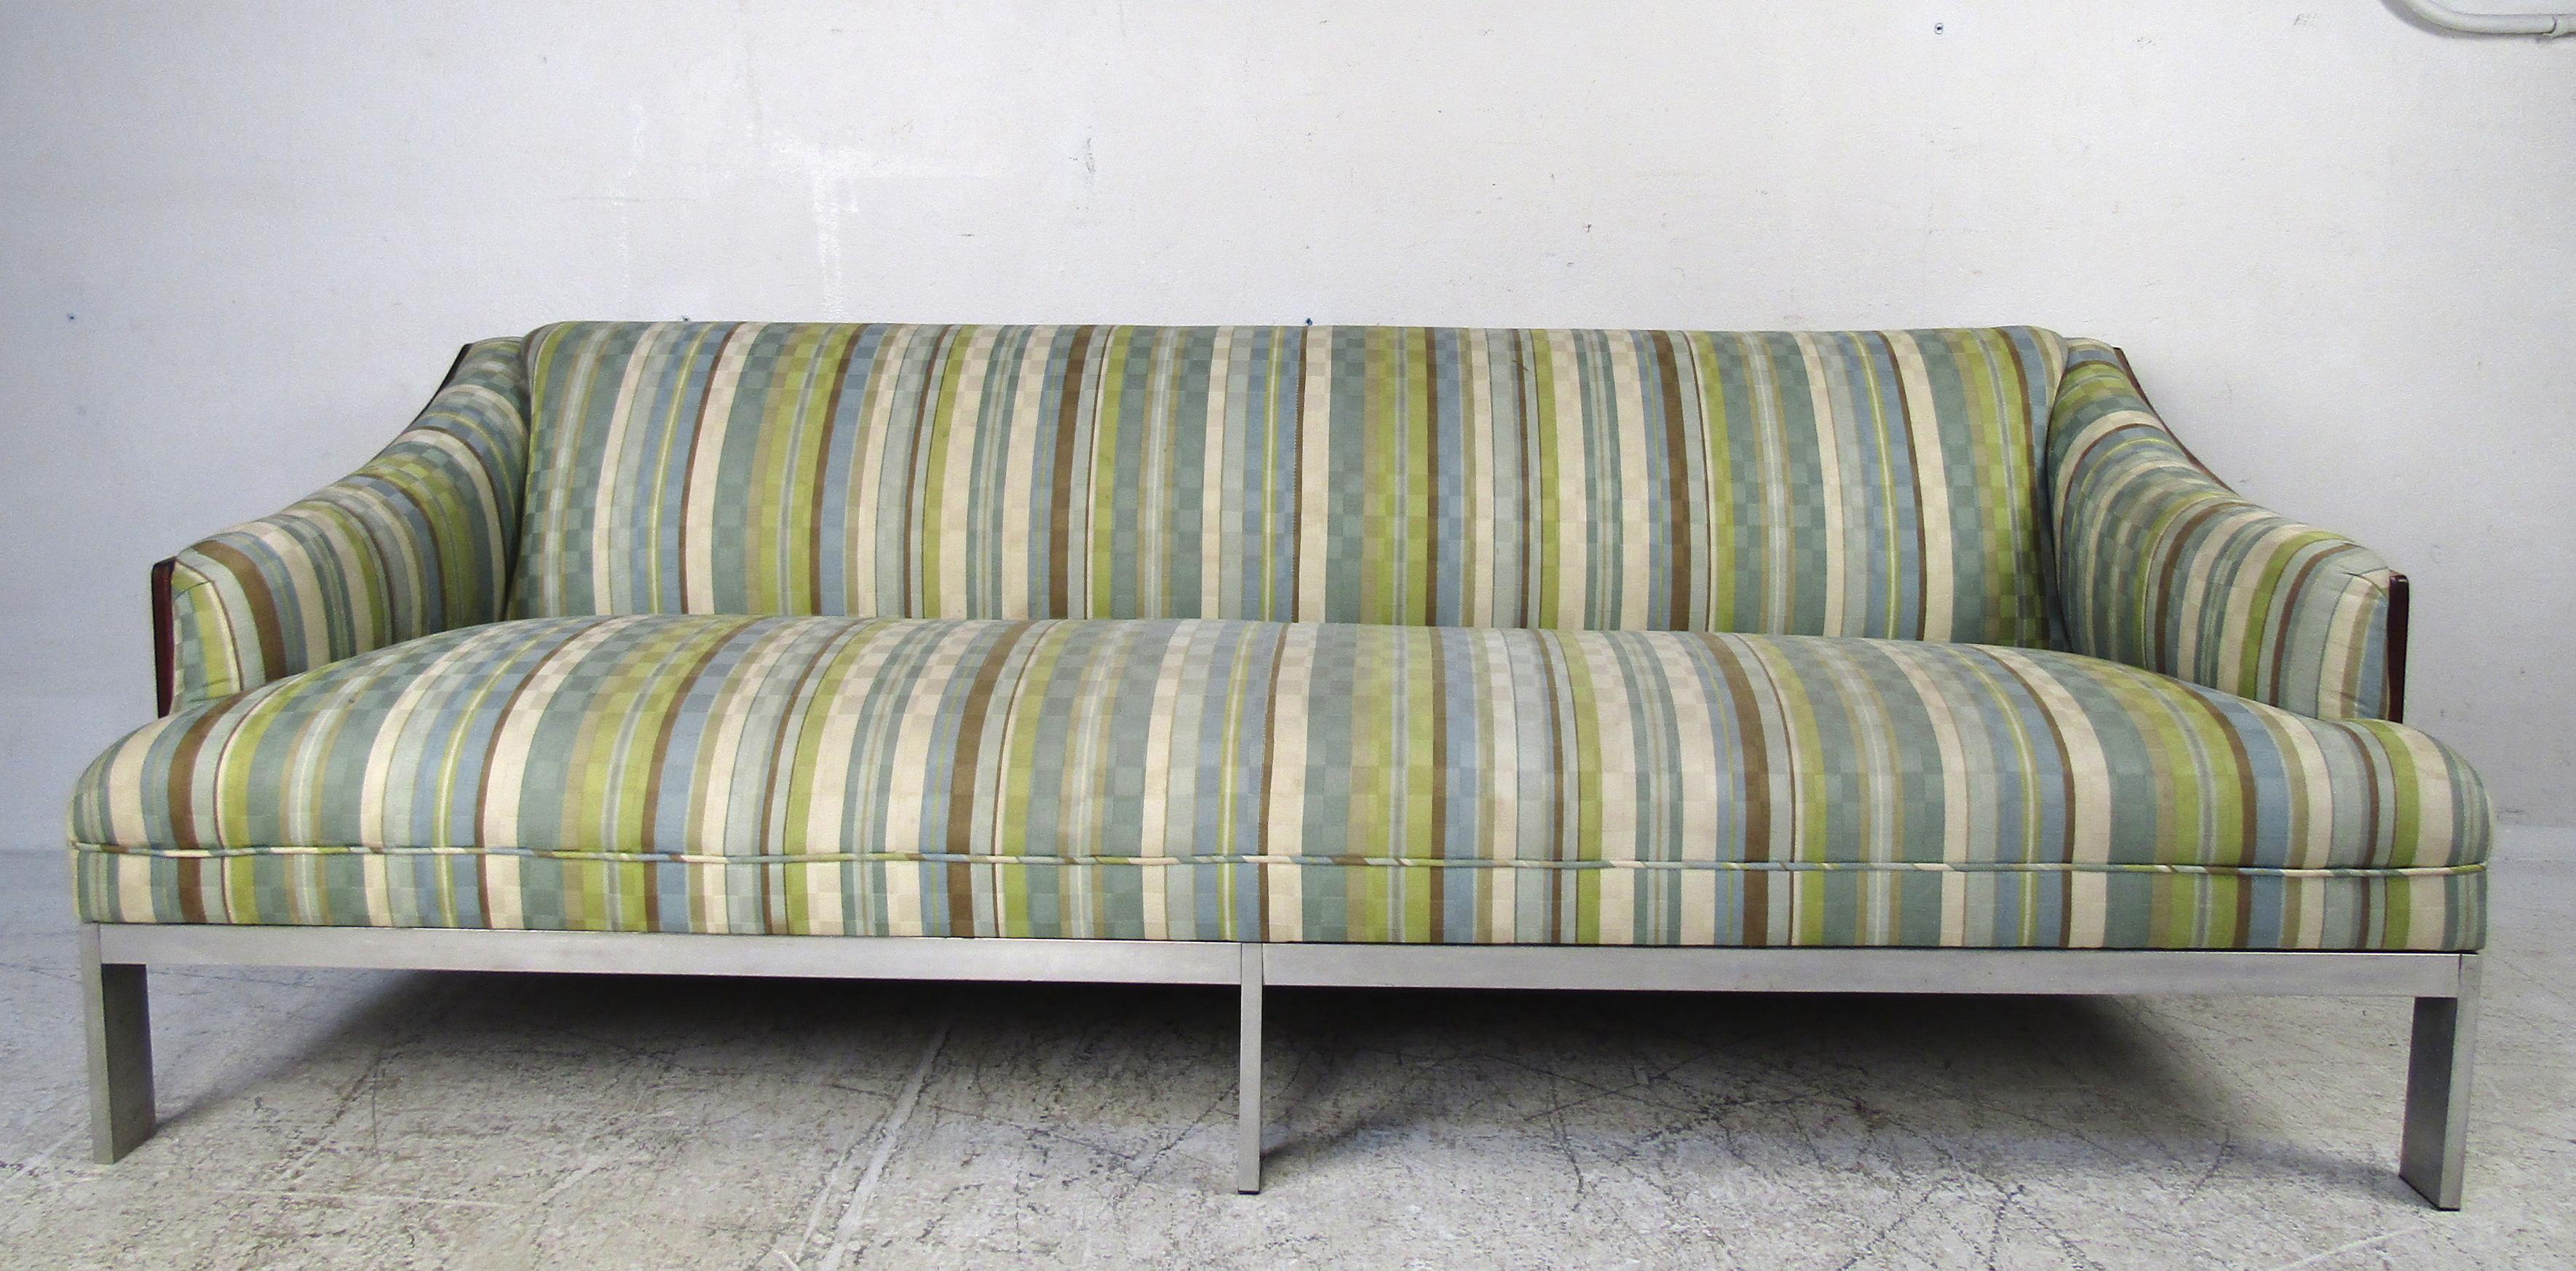 This stunning vintage modern sofa boasts a rich rosewood back and sculpted sides. Six flat bar chrome legs and overstuffed seating show quality construction and ensure maximum comfort. A colorful vintage fabric adds to the midcentury appeal. This